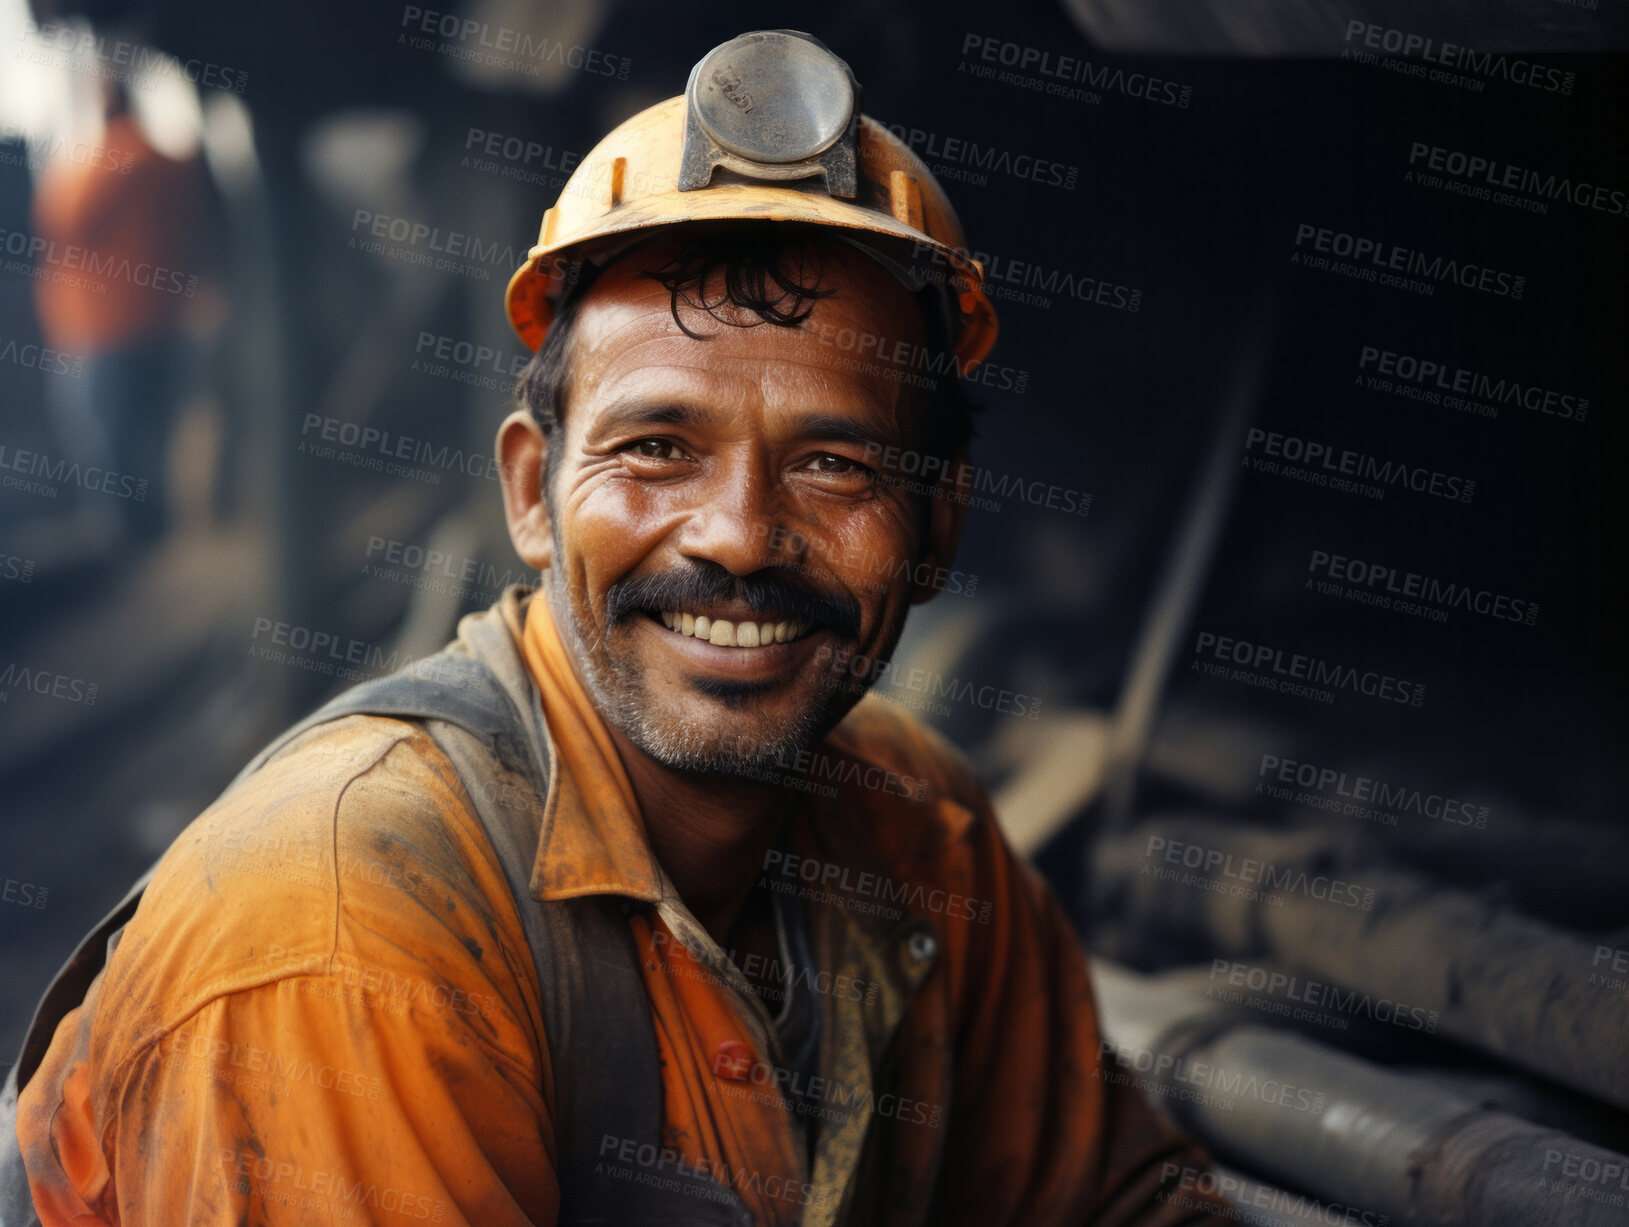 Buy stock photo Happy, smiling construction site worker posing, looking at camera.